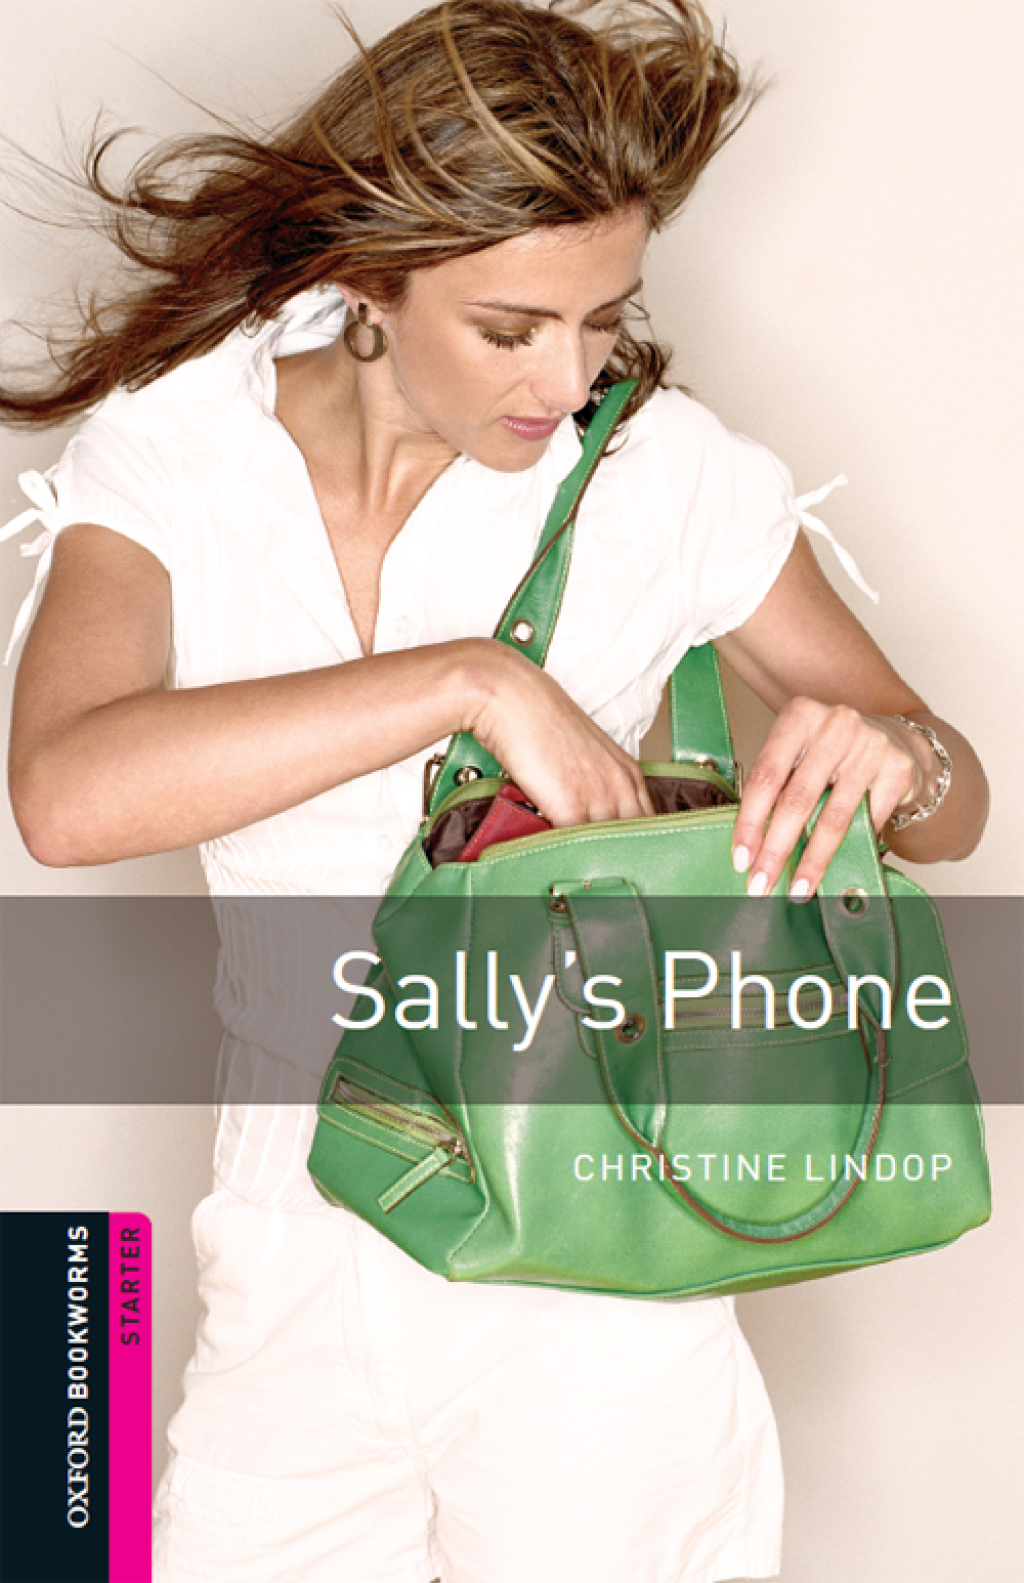 Sally's Phone Starter Level Oxford Bookworms Library - 3rd Edition (eBook Rental)